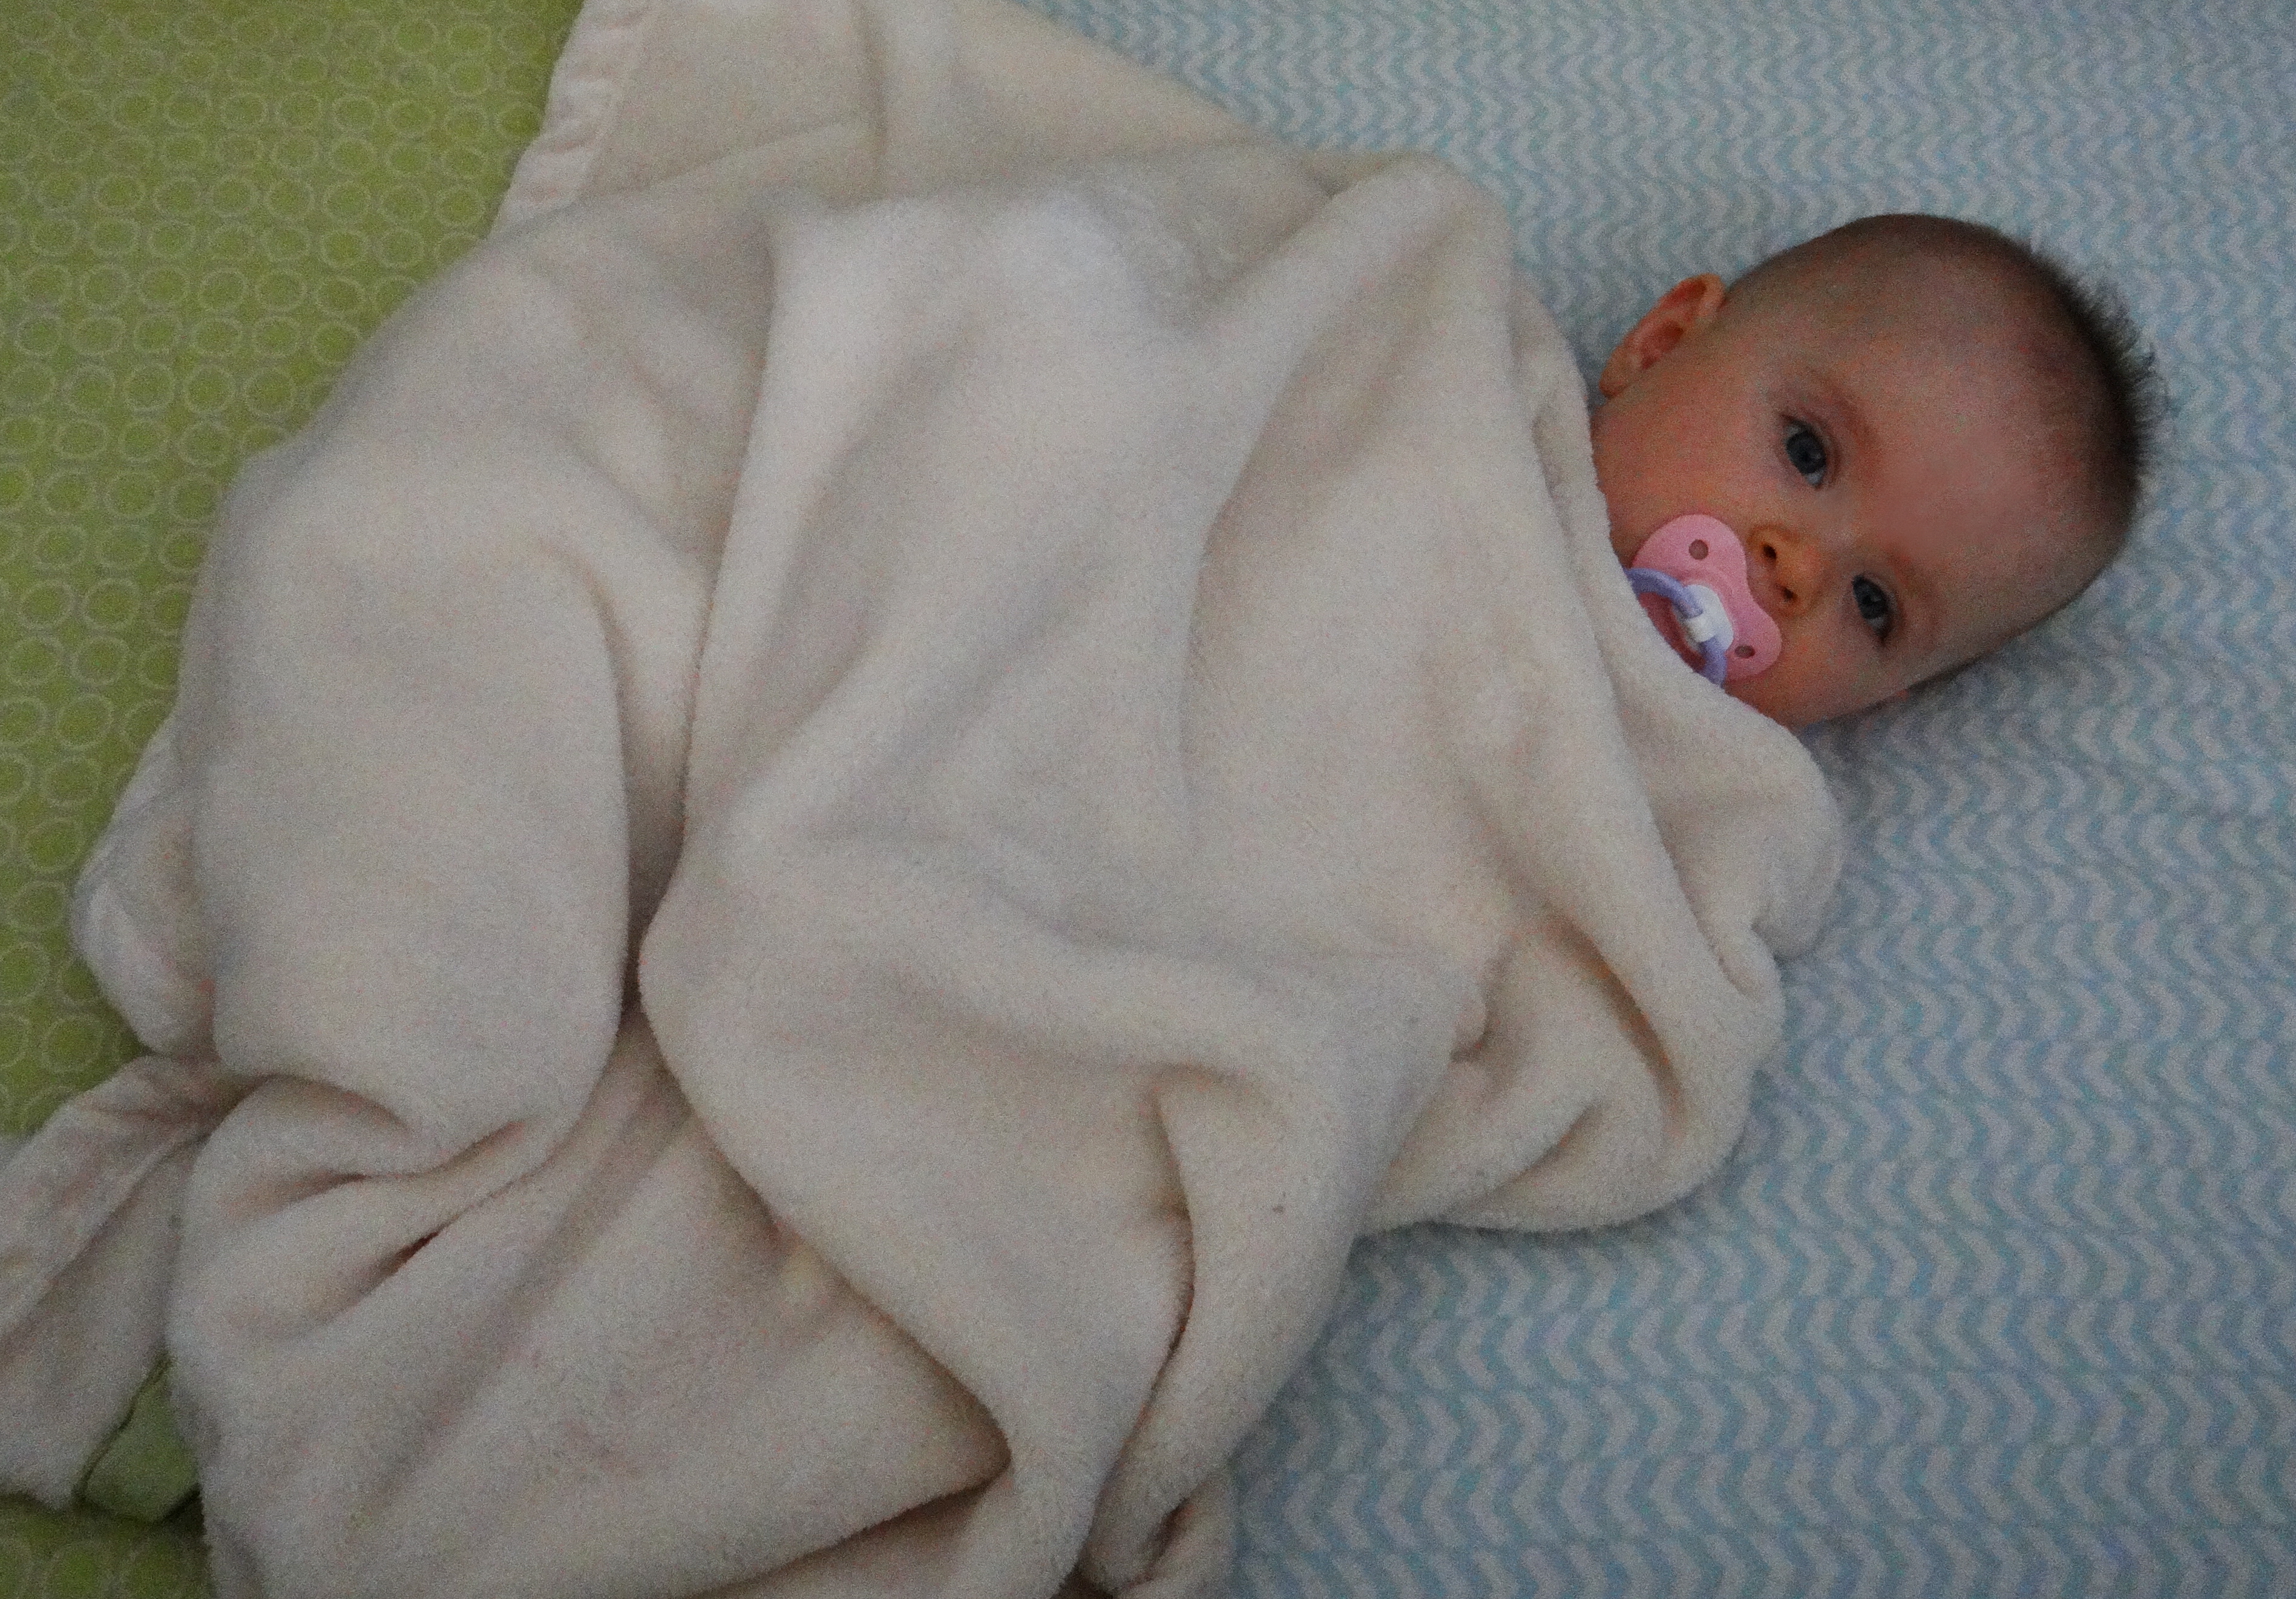 Baby bundled in a fuzzy blanket in a crib